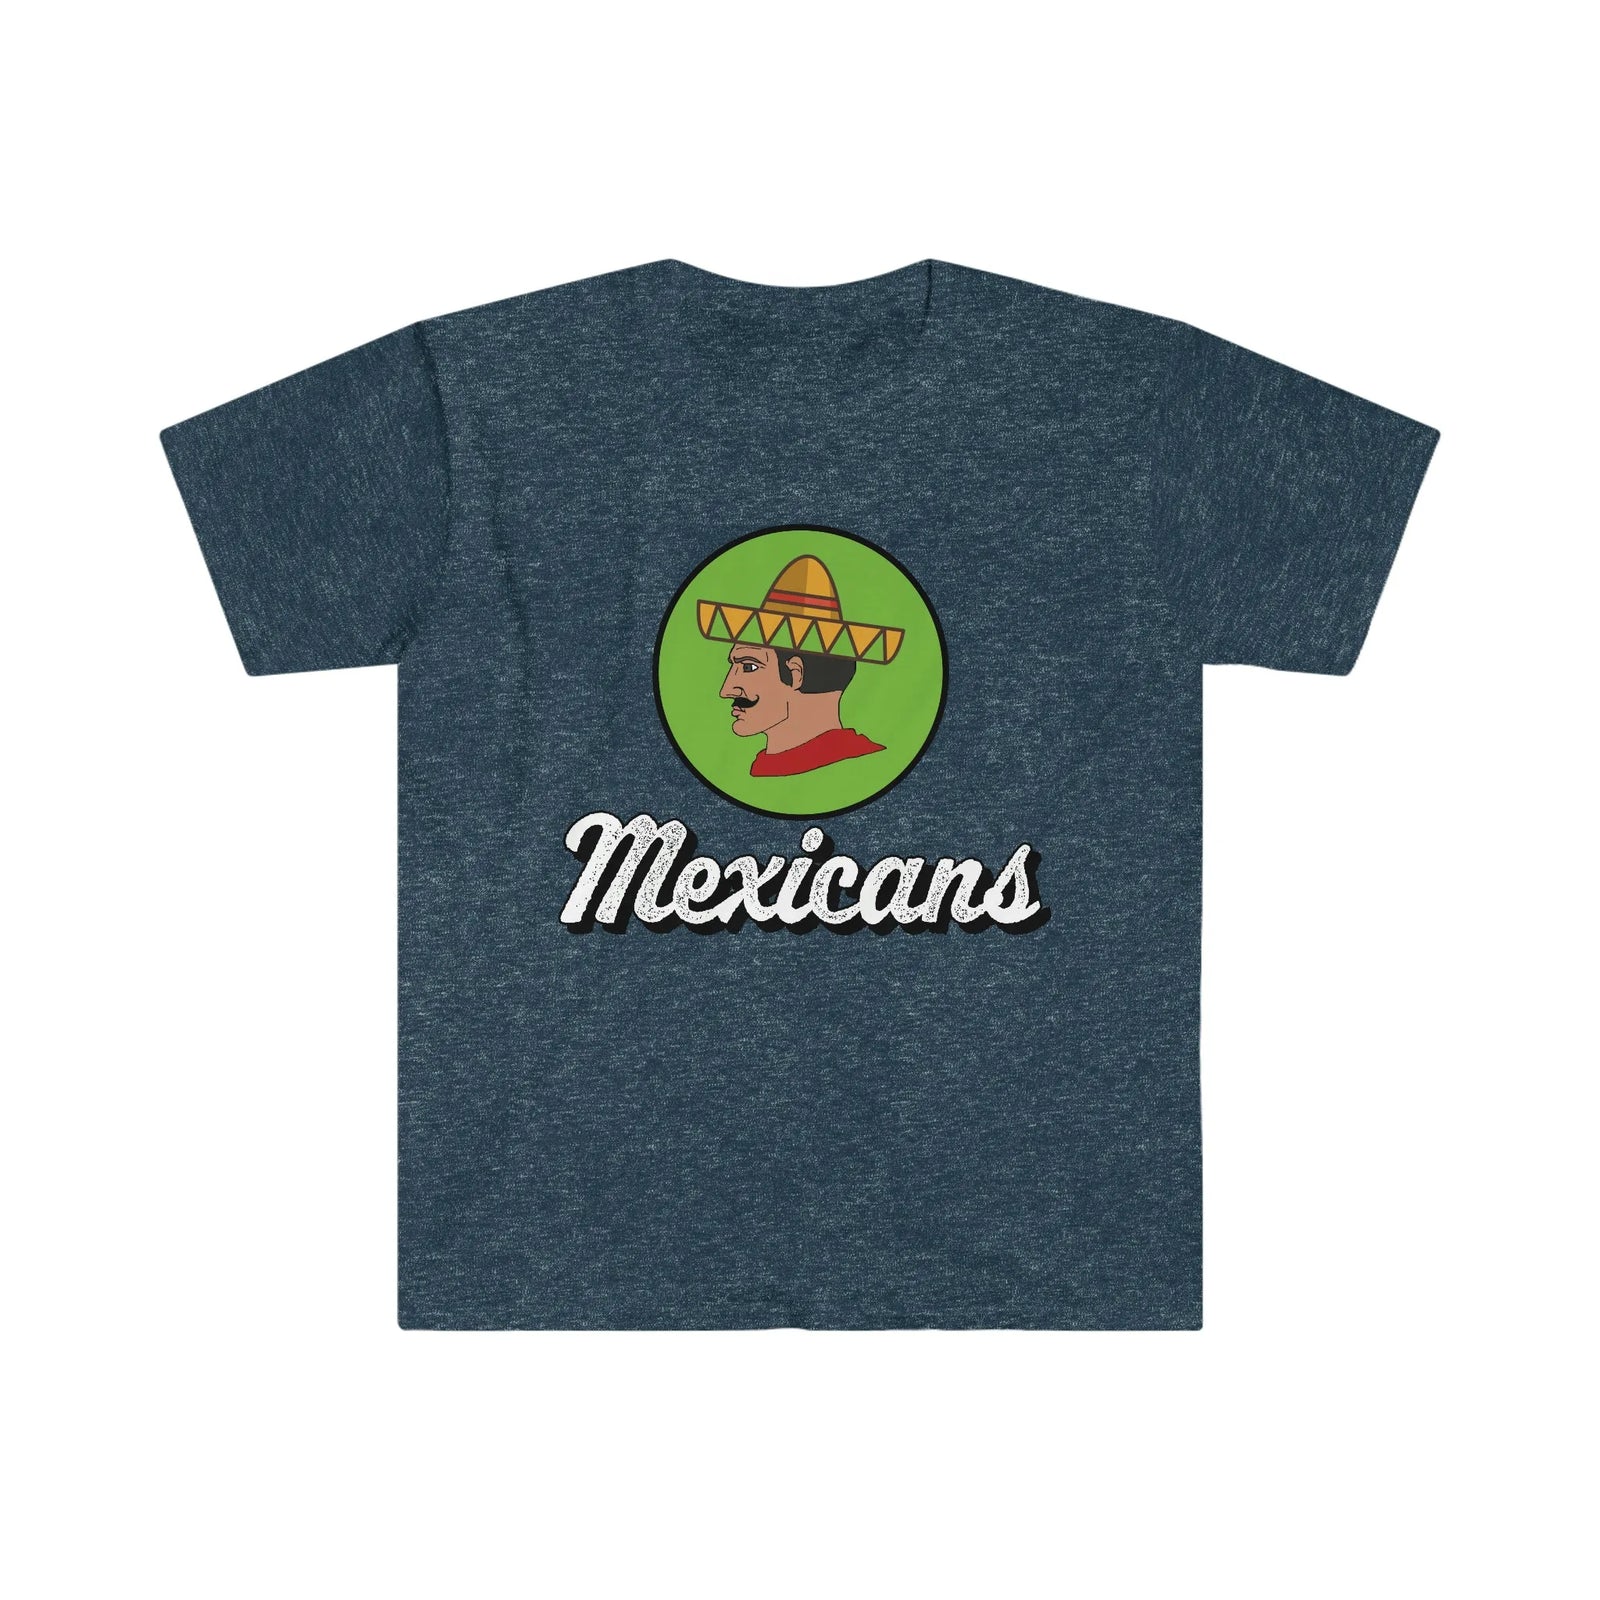 Mexican Chad: The Ultimate Team Tee